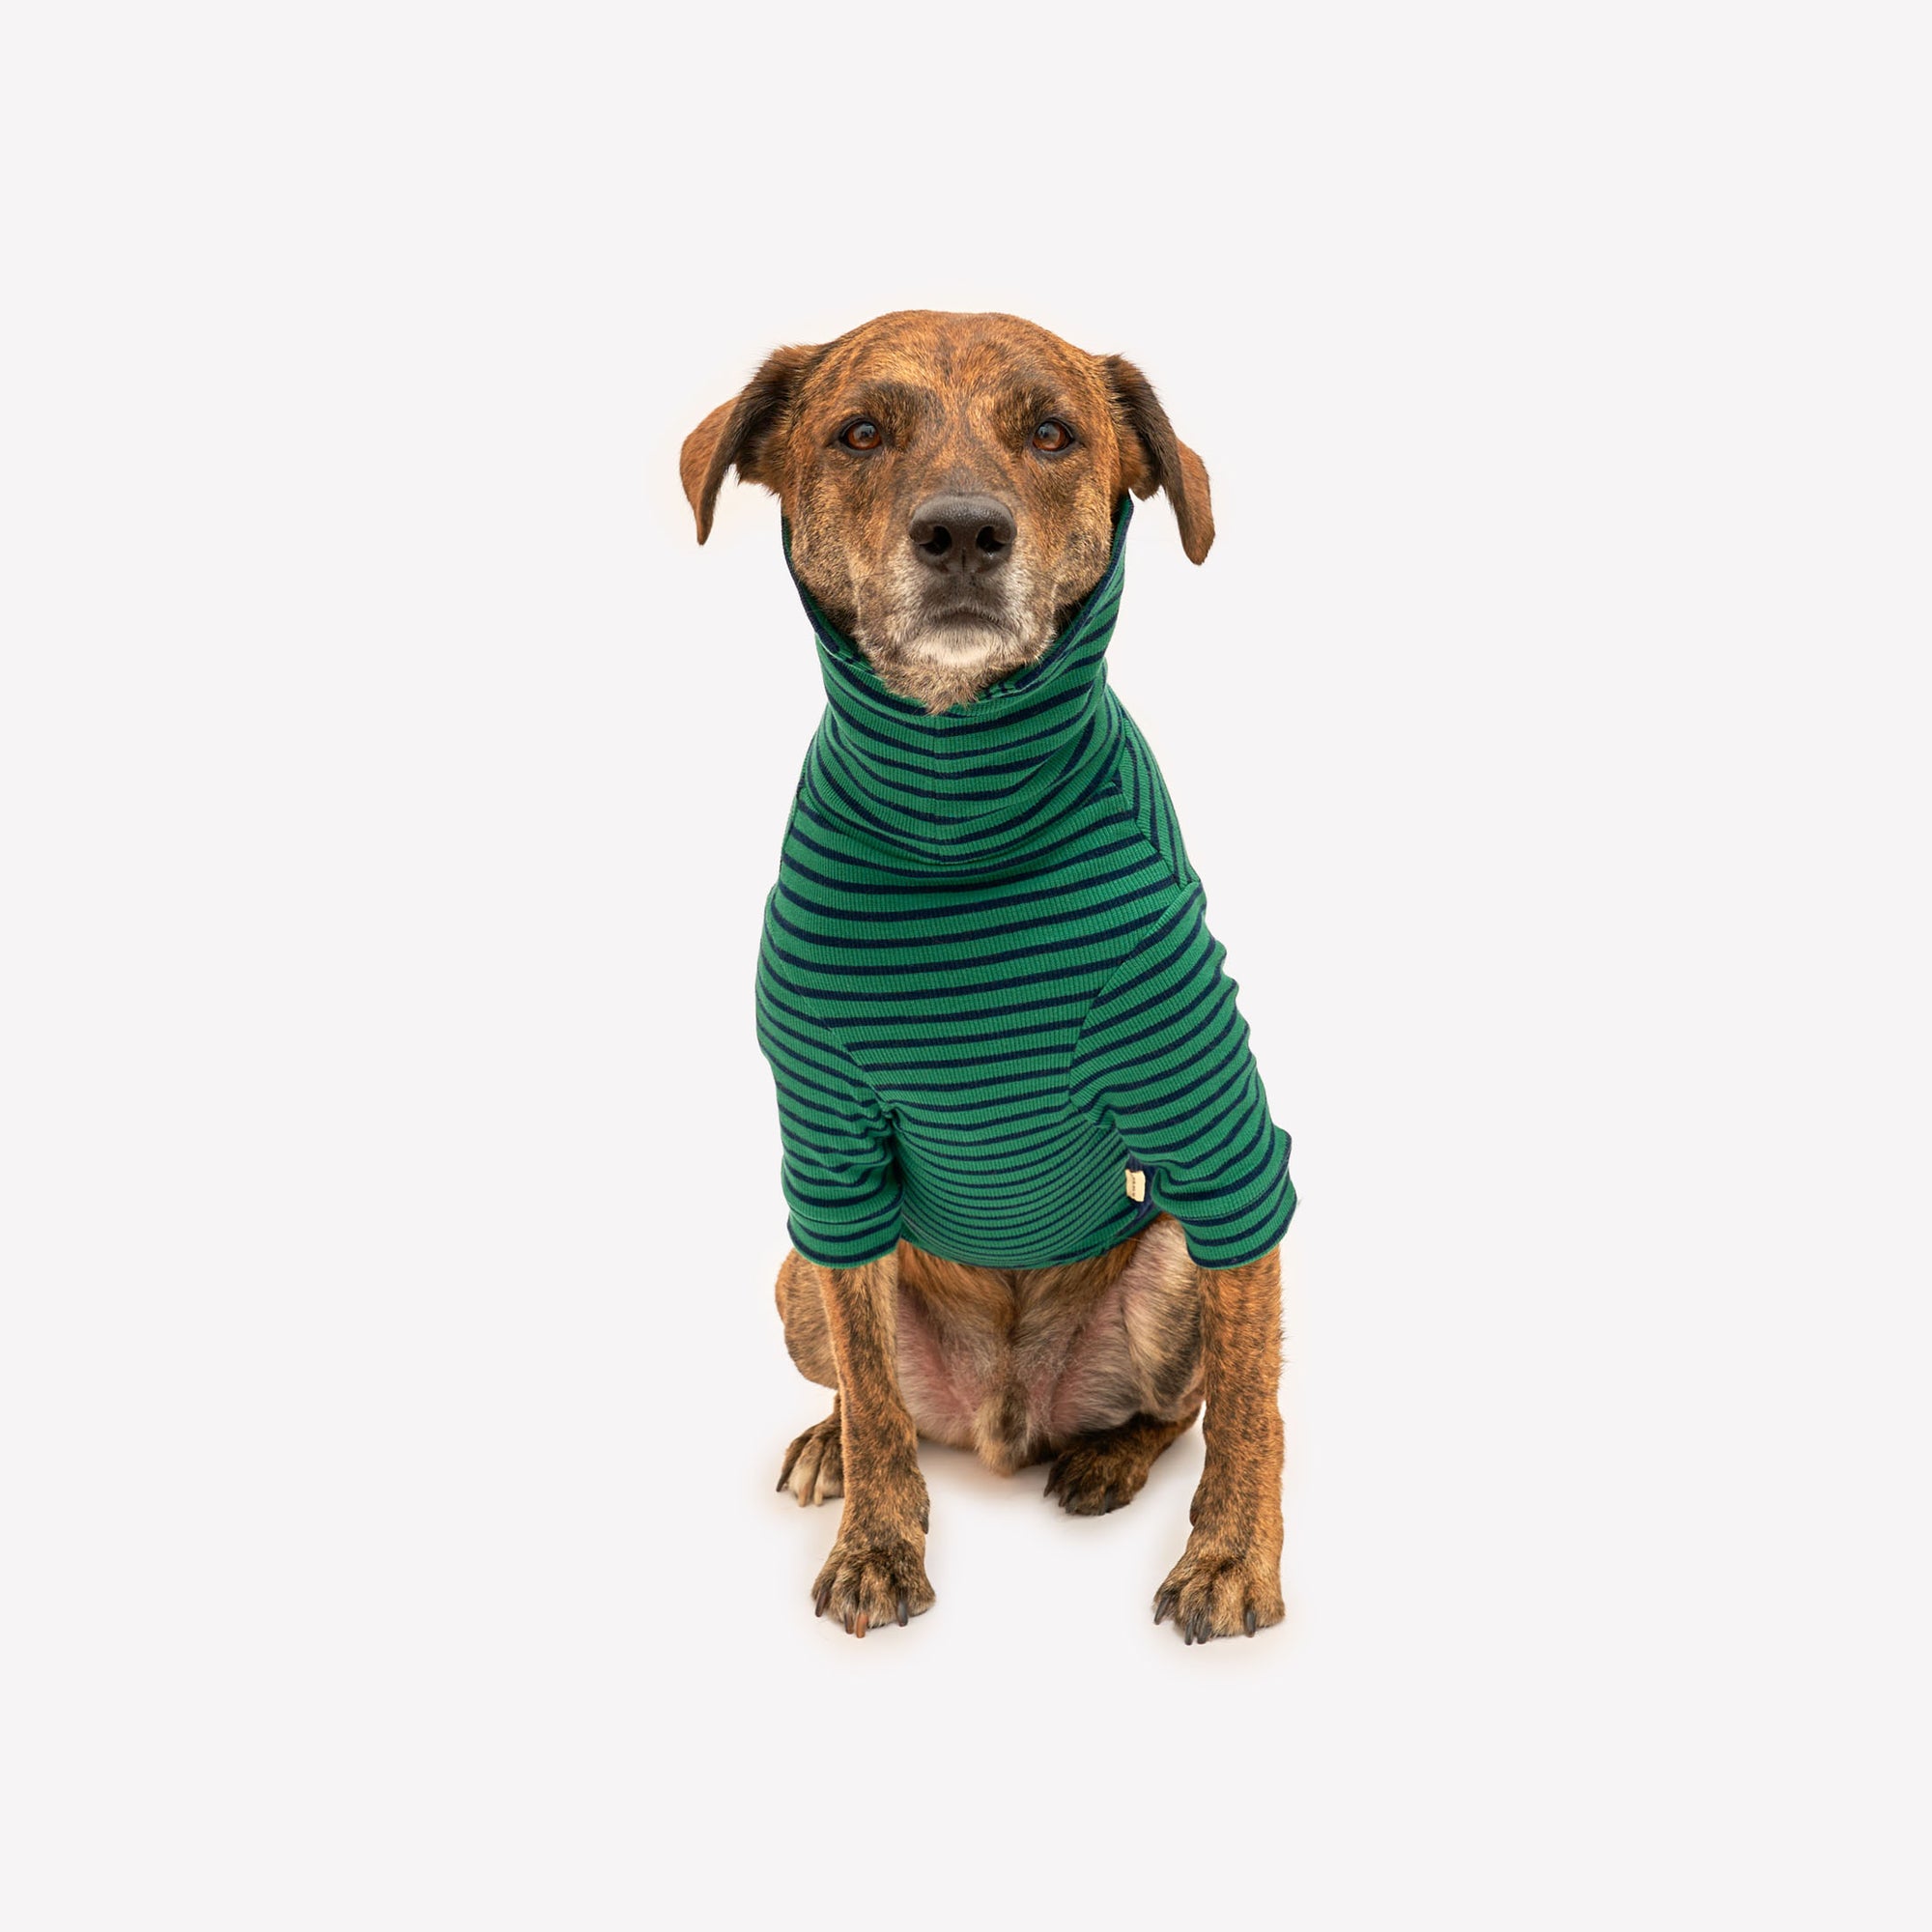 Confident brindle dog sitting in a snug green striped turtleneck, a true trendsetter in canine apparel.